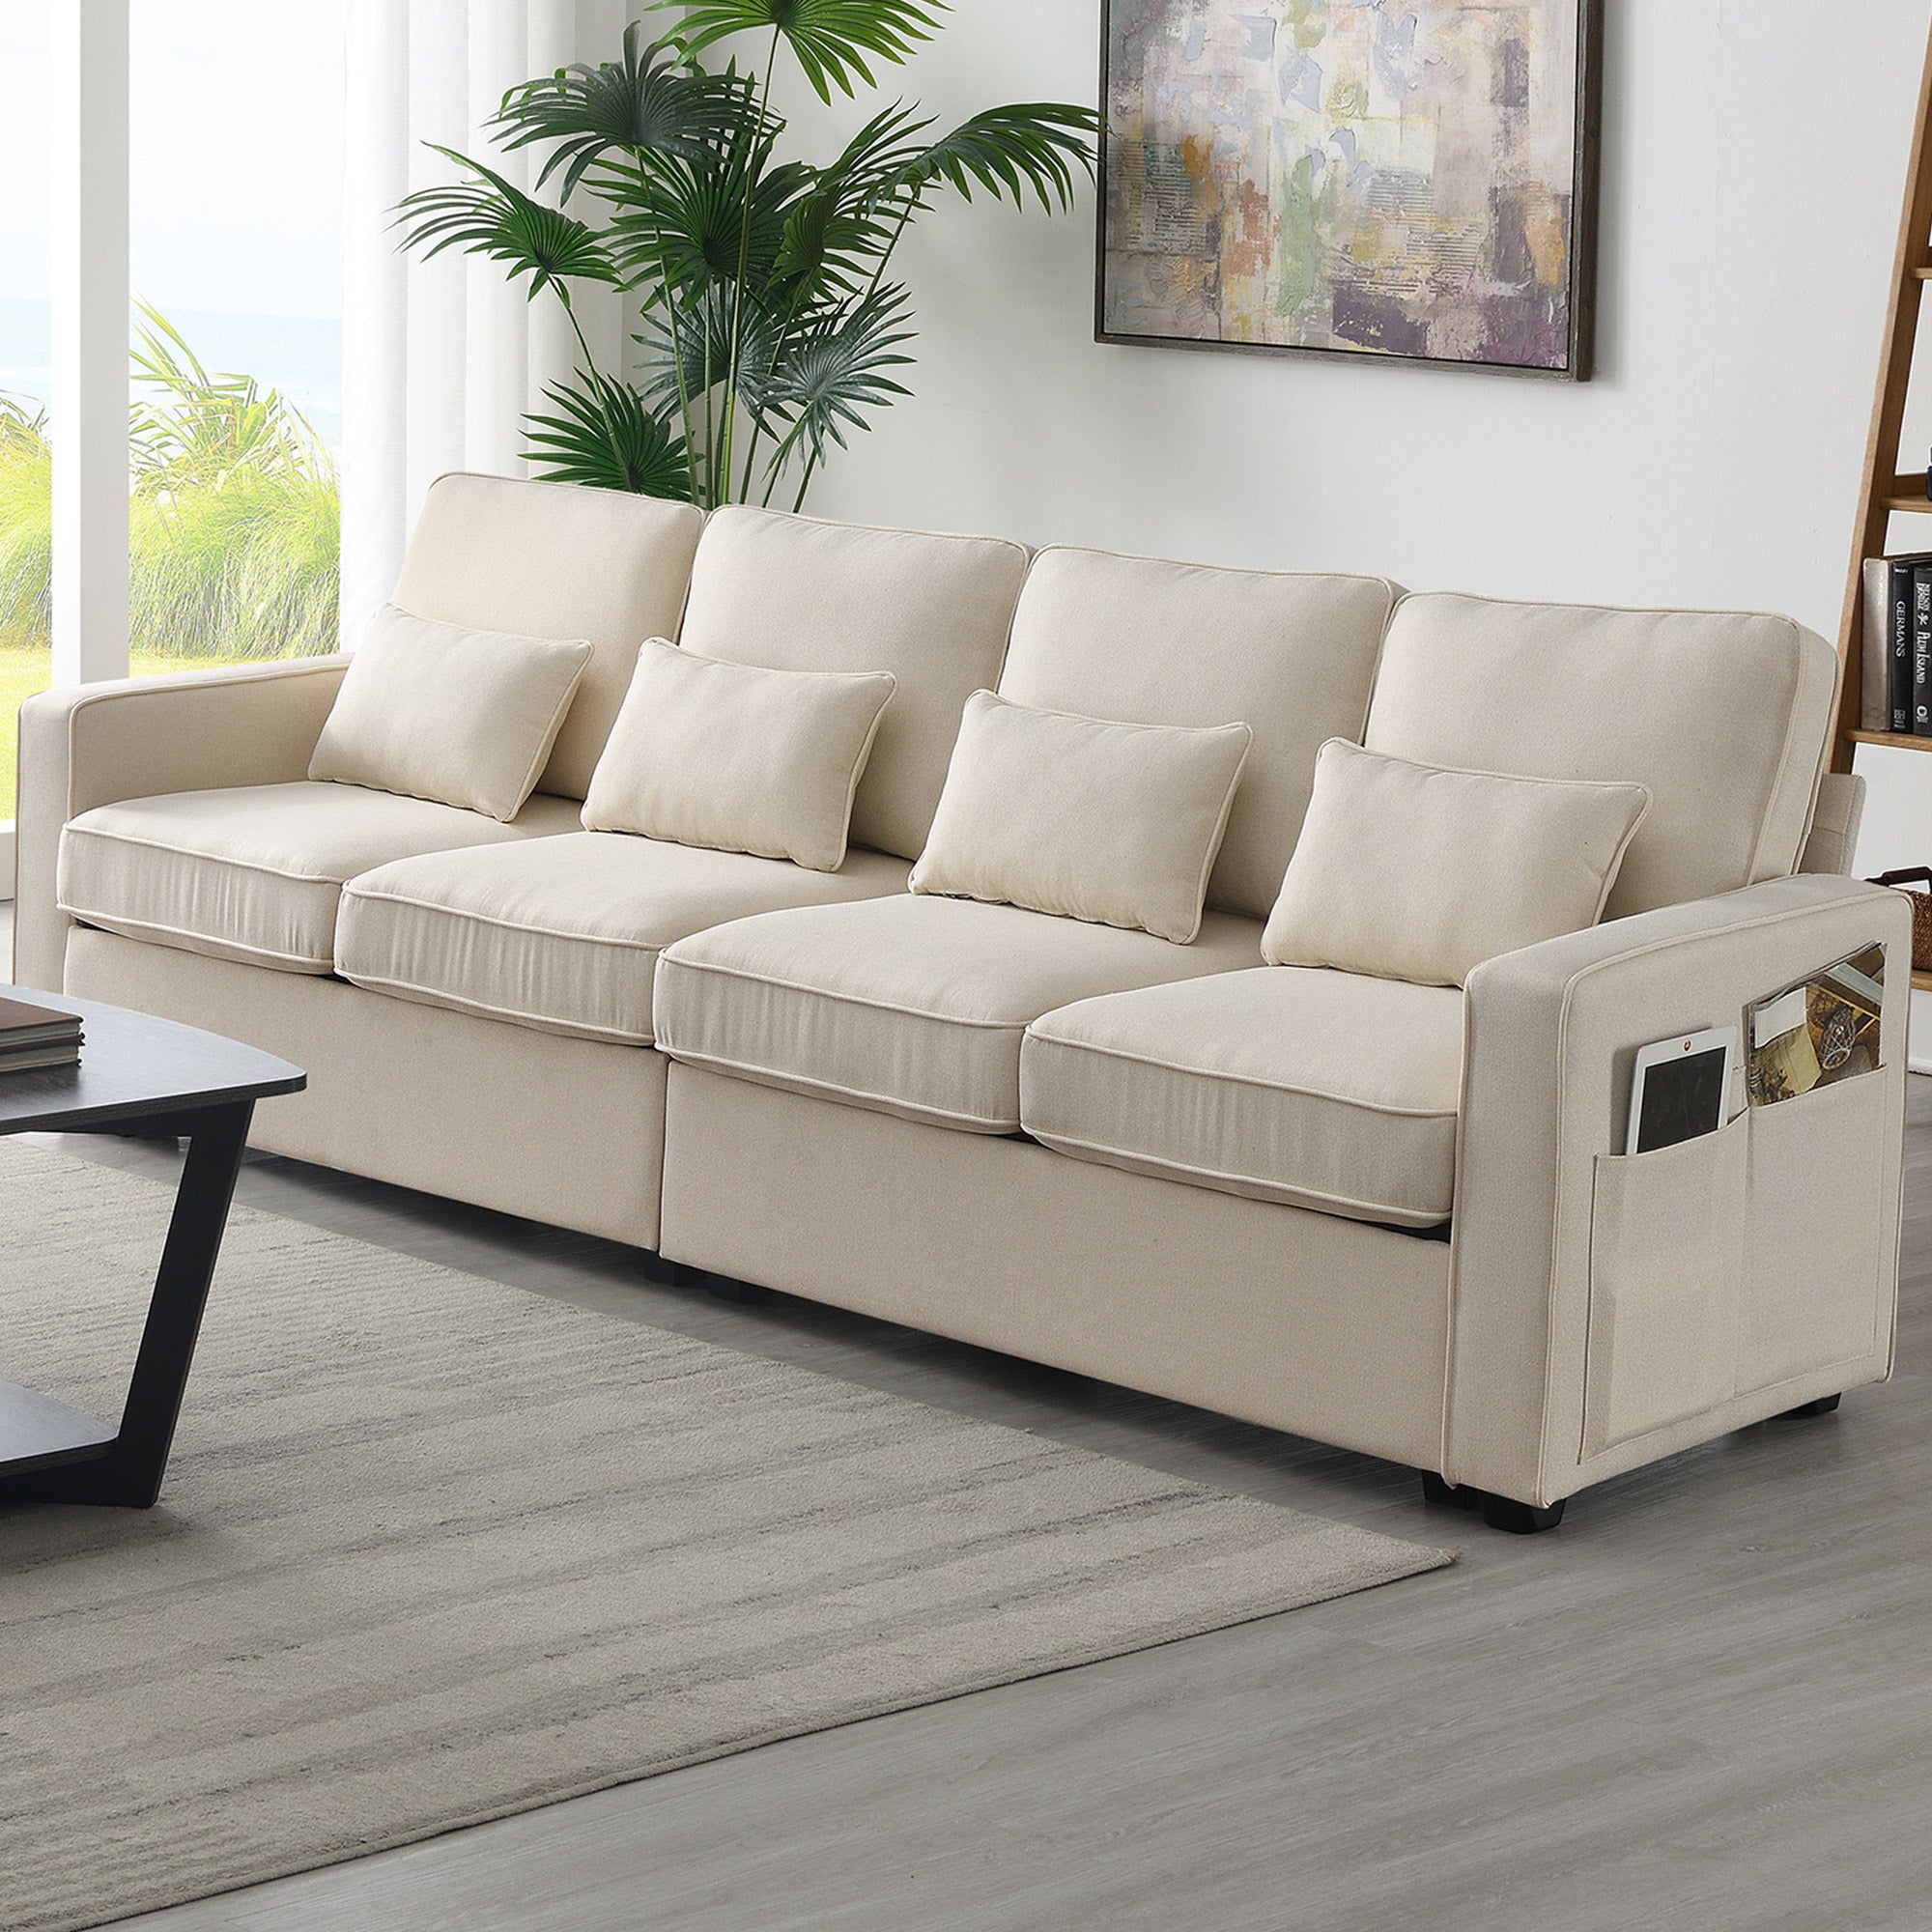 104" 4-Seater Modern Linen Fabric Sofa with Armrest Pockets and 4 Pillows,Minimalist Style Couch - Beige